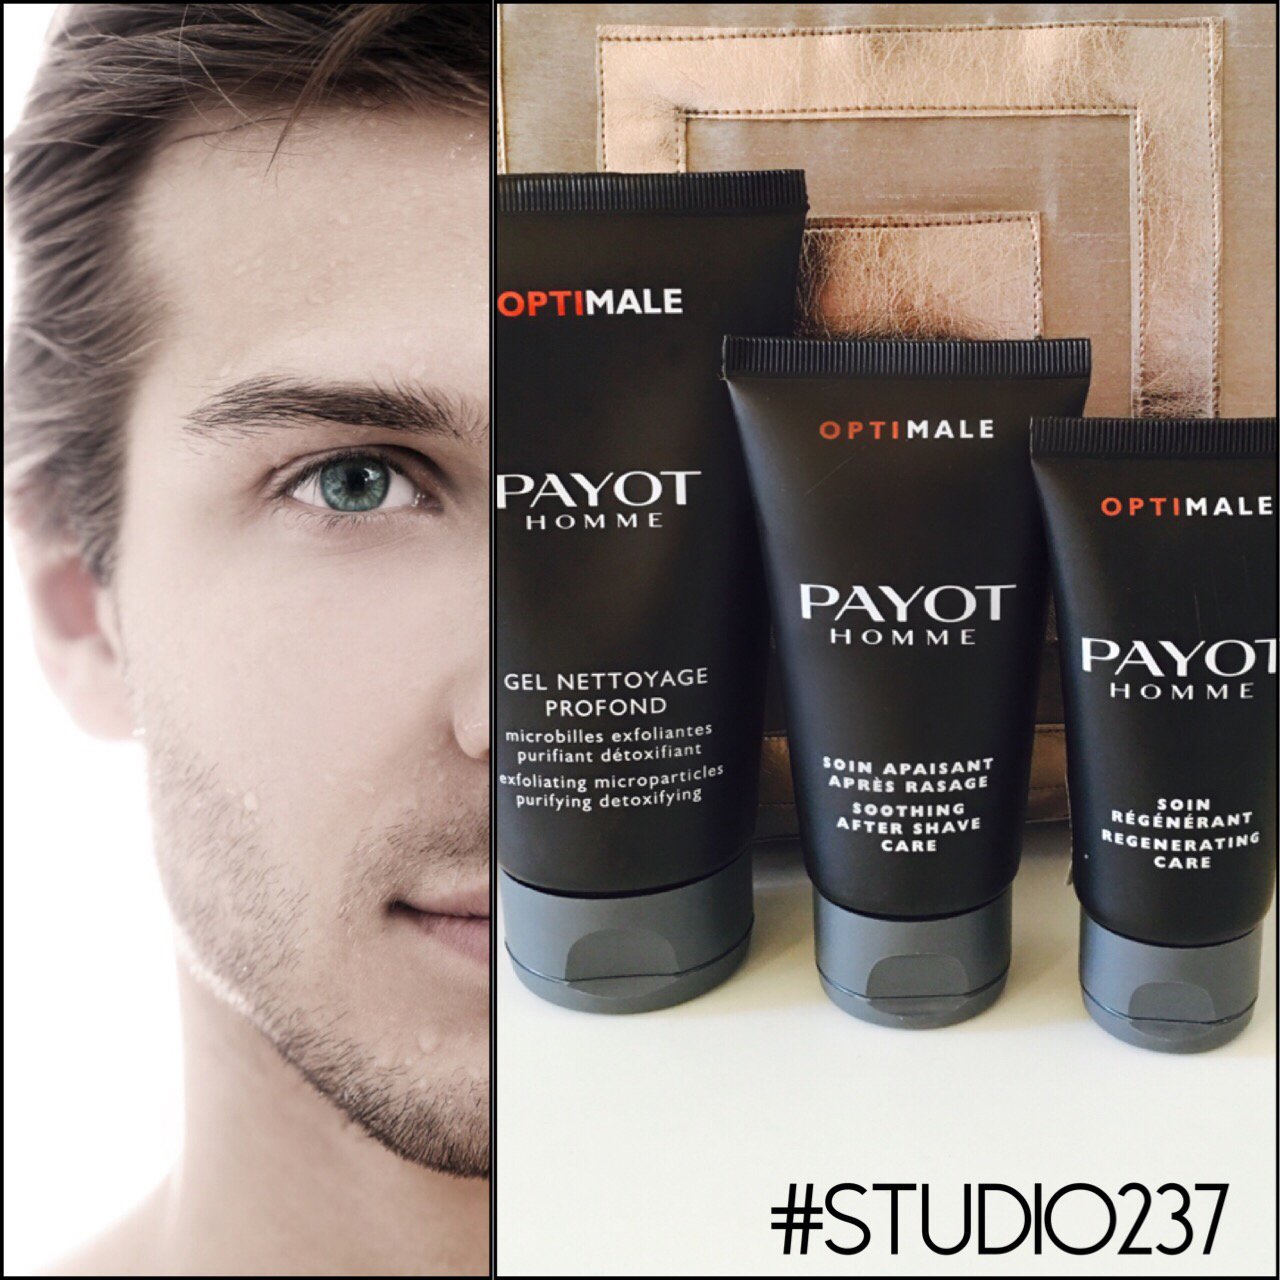 Studio 237 on Twitter: "Payot has a great line for men as well! Come in  &amp; we will help find yours! #Studio237 #menskincare #mensline #Payot  https://t.co/BpzarfVilL" / Twitter